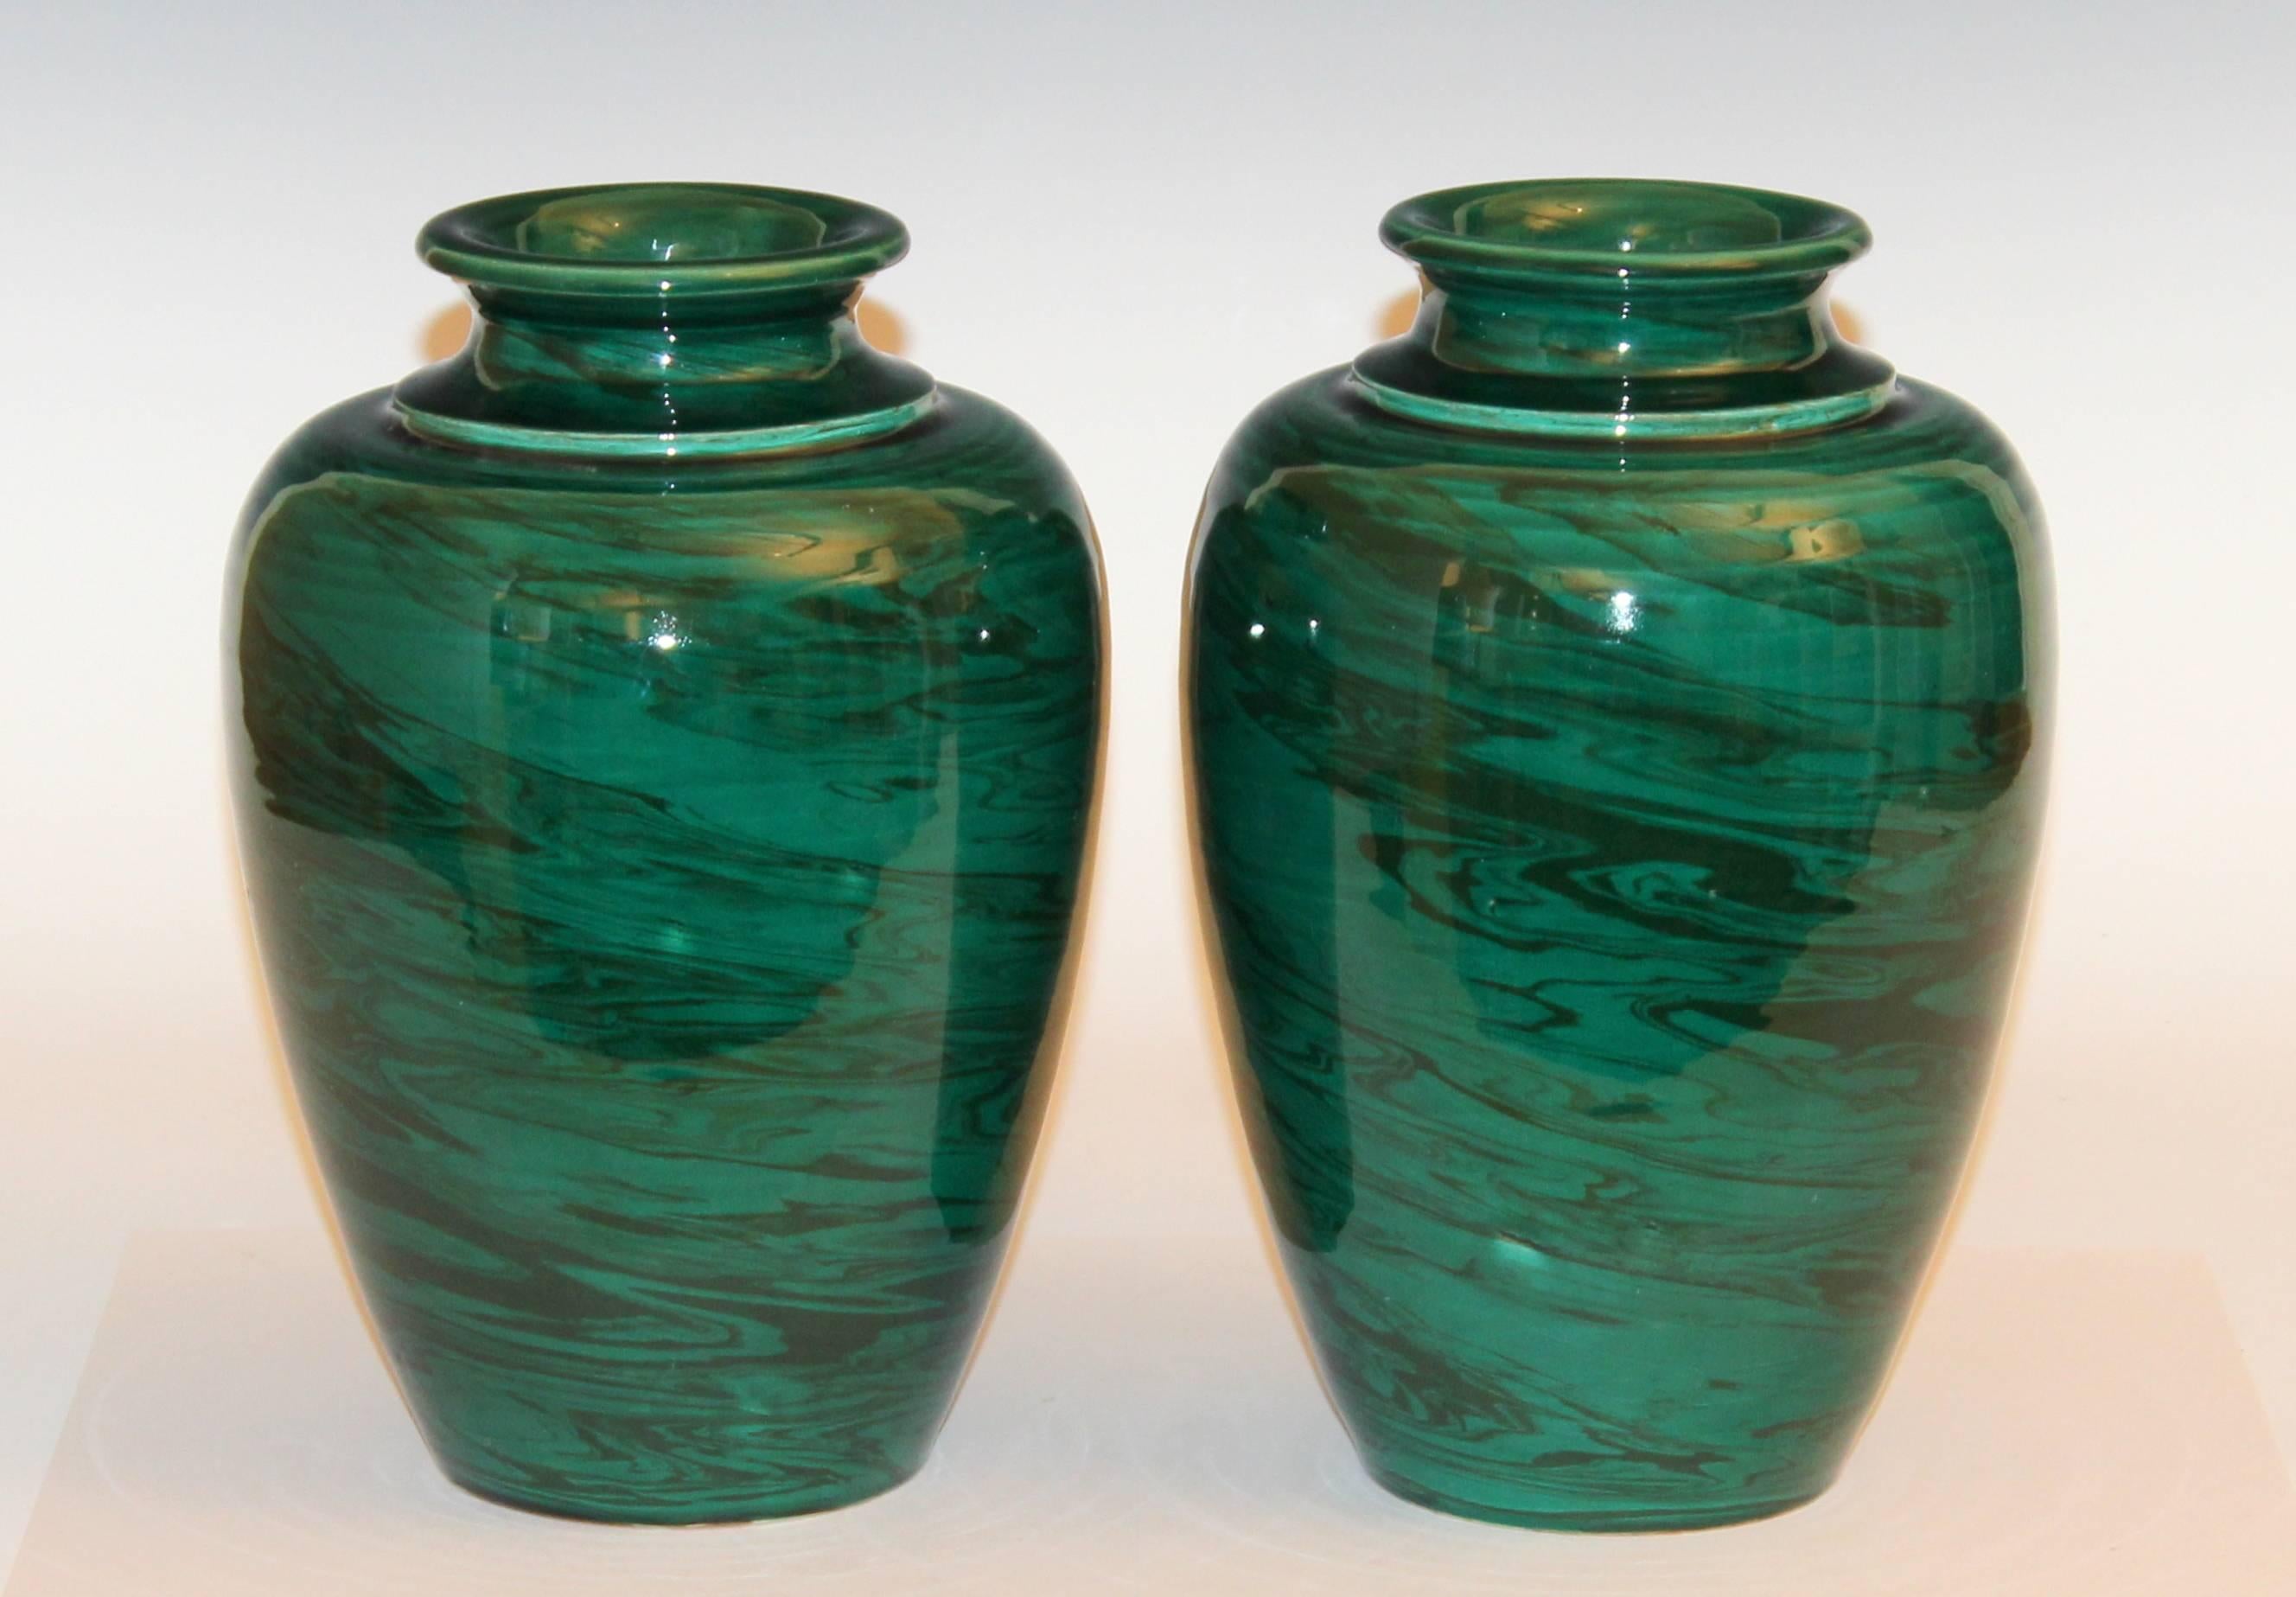 Great pair of hand-turned, vintage Bitossi Italian art pottery green marbleized vases with interesting articulated necks, circa 1970s. Measures: 9 1/2" high, 6" diameter. Excellent condition.